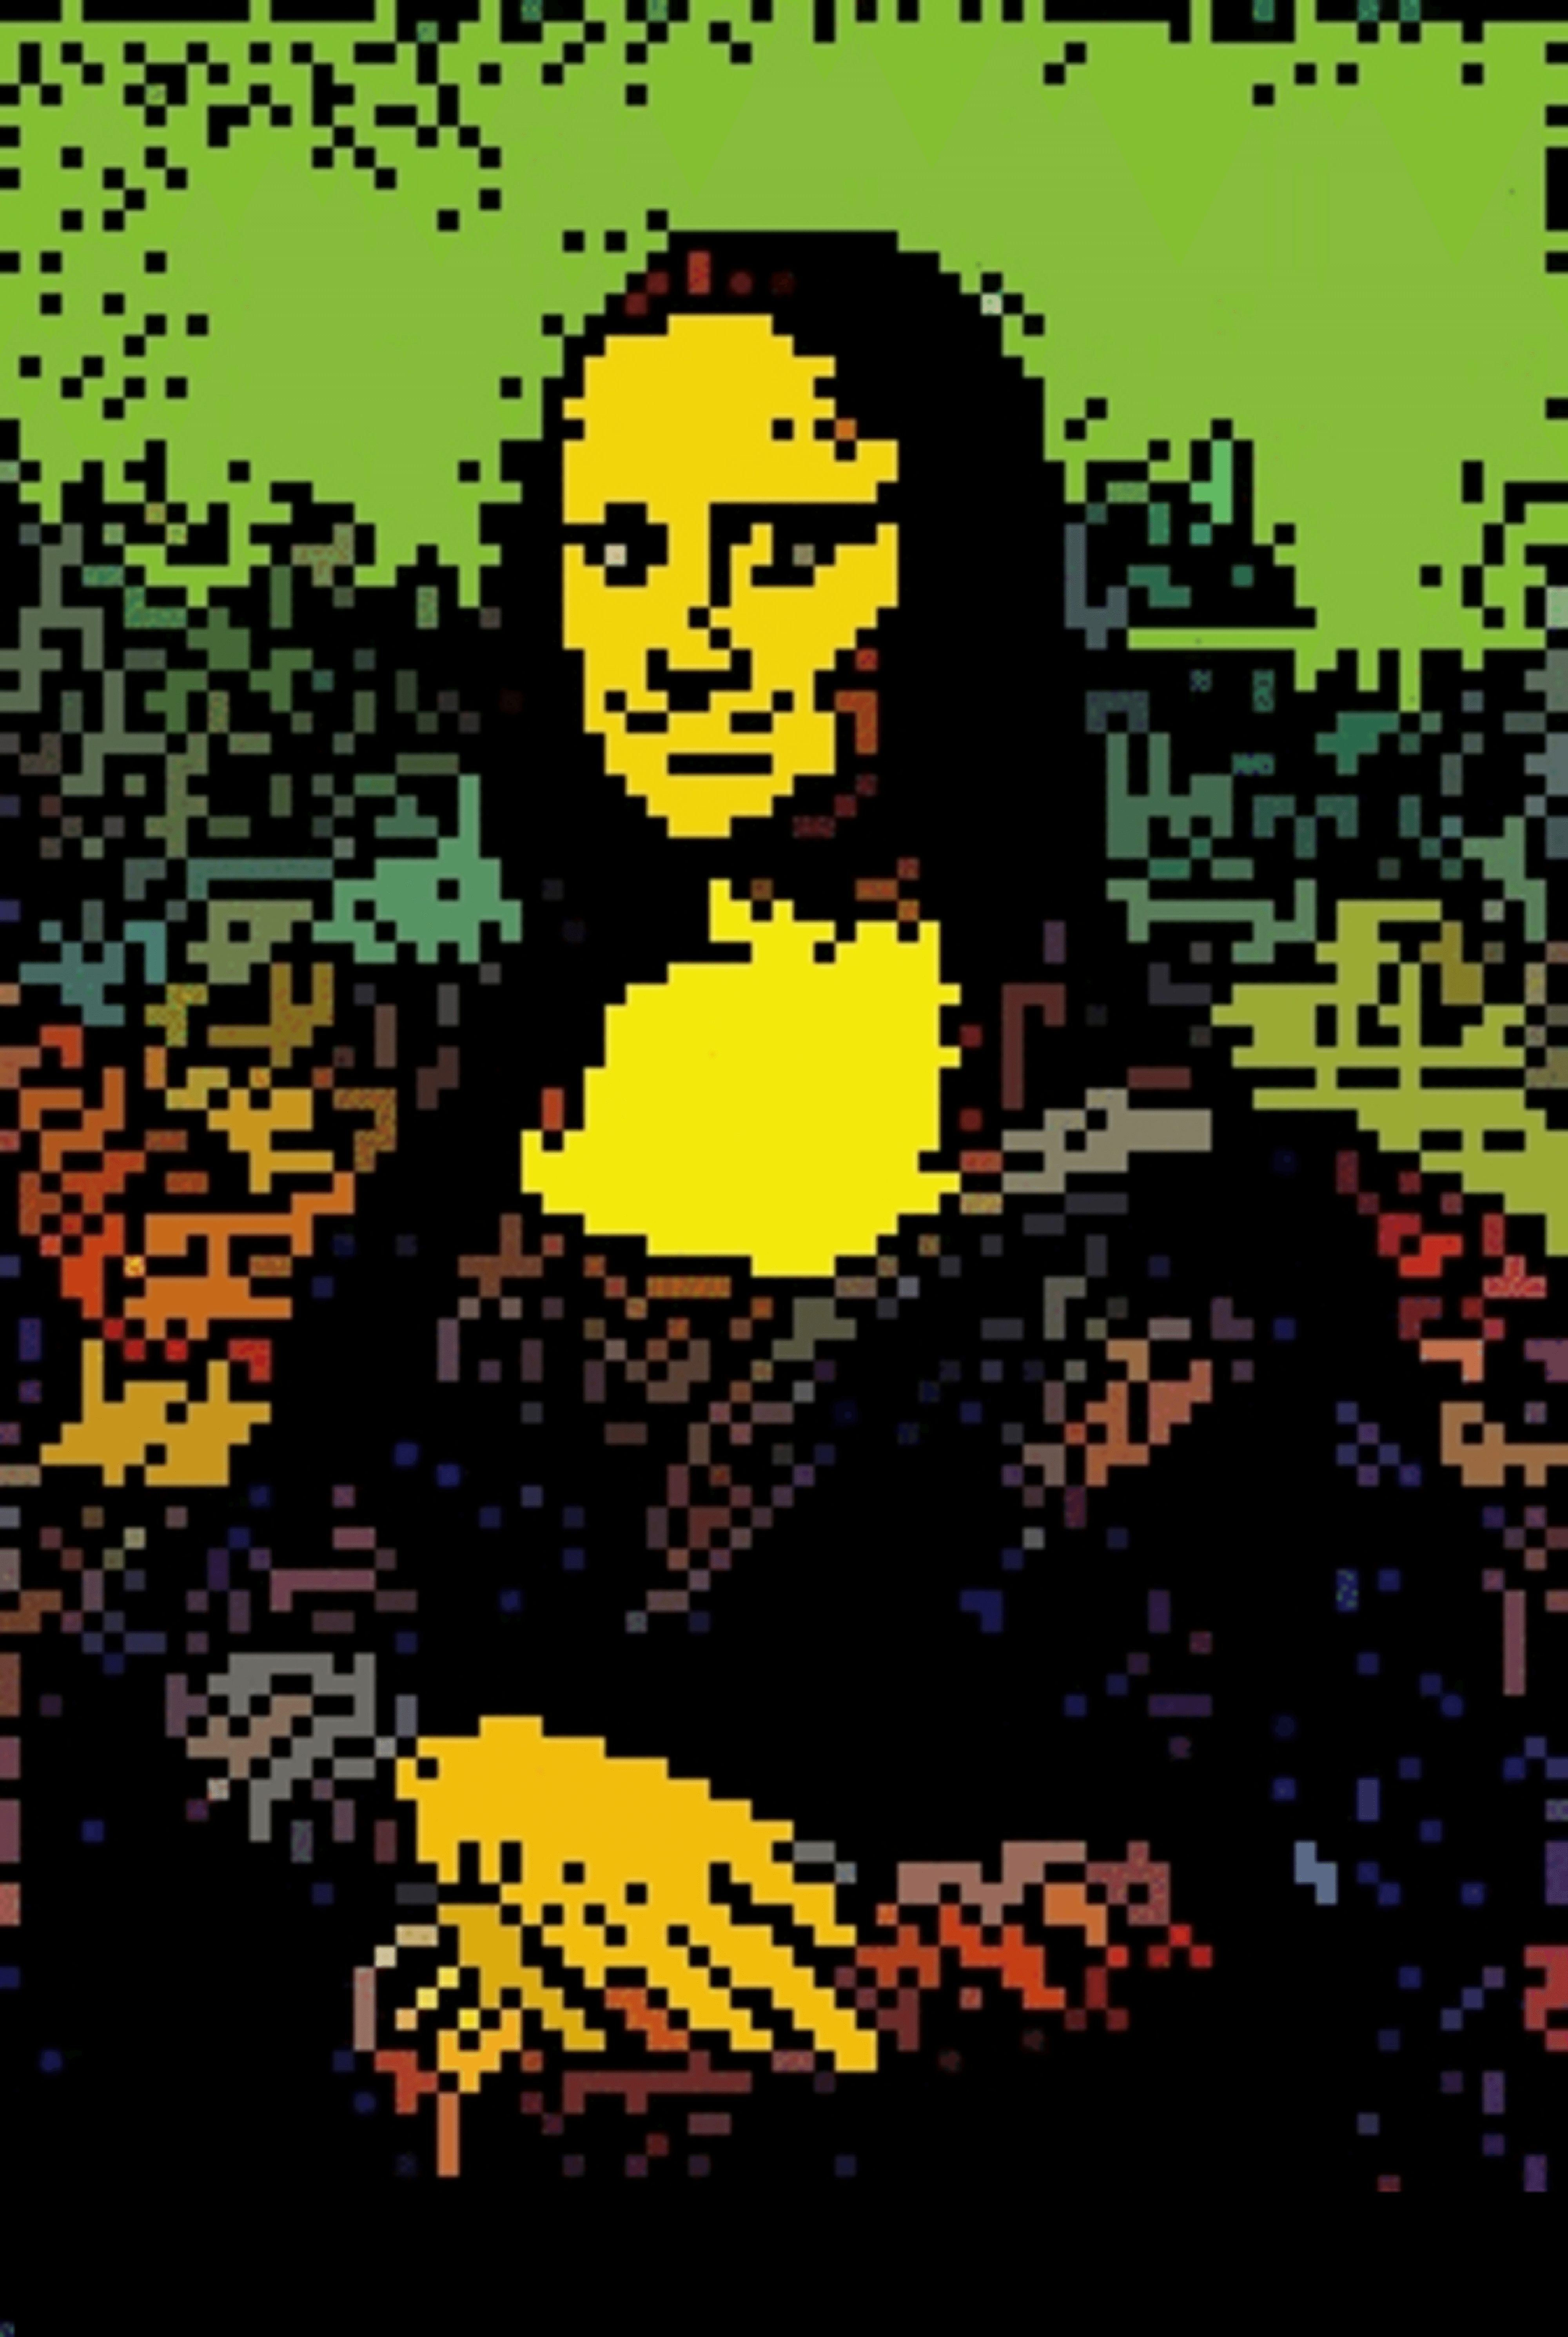 Mona Lisa by 8bit Masters a 1000 Minting Series created by SOLLOG for Polygon Blockchain